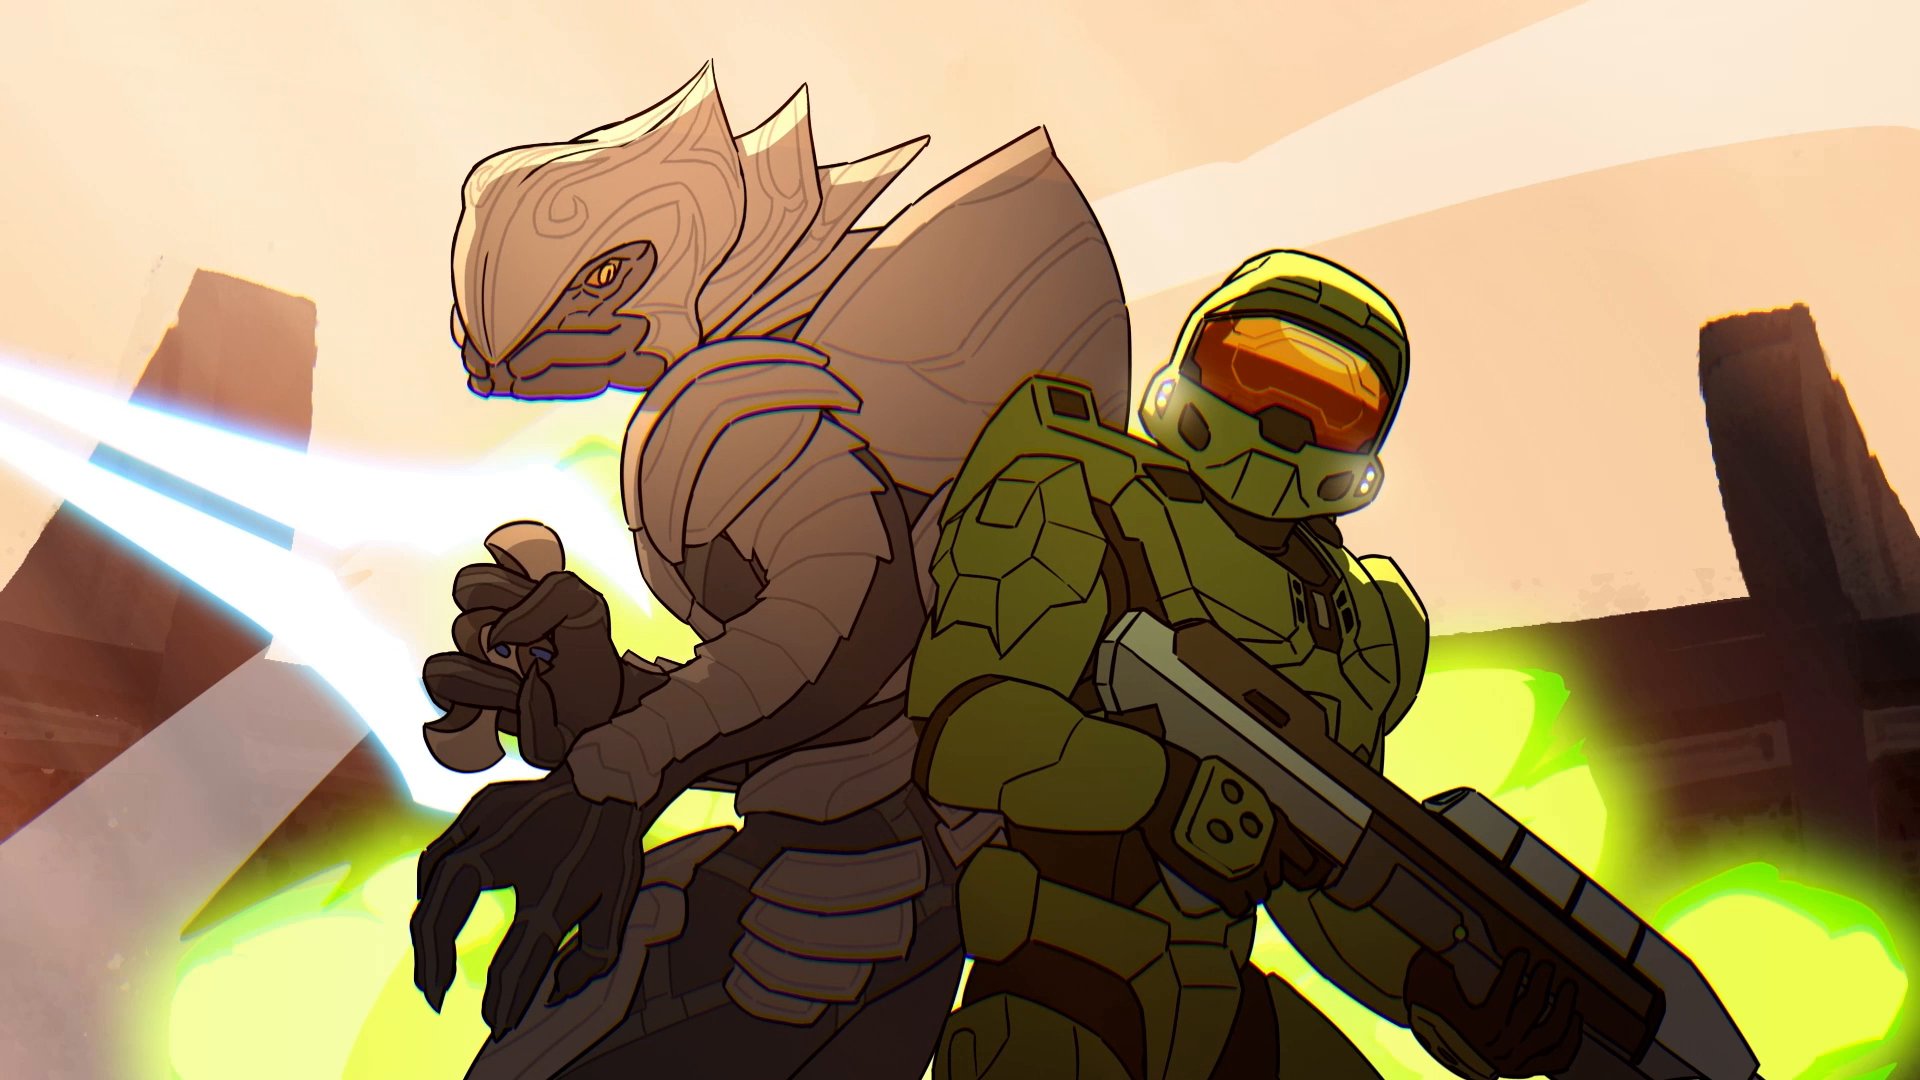 Halo on Twitter: "The Brawlhalla: Combat Evolved Crossover featuring The Master Chief and The Arbiter arrives July 12th! 💥 https://t.co/xcTPbrtzja" / Twitter